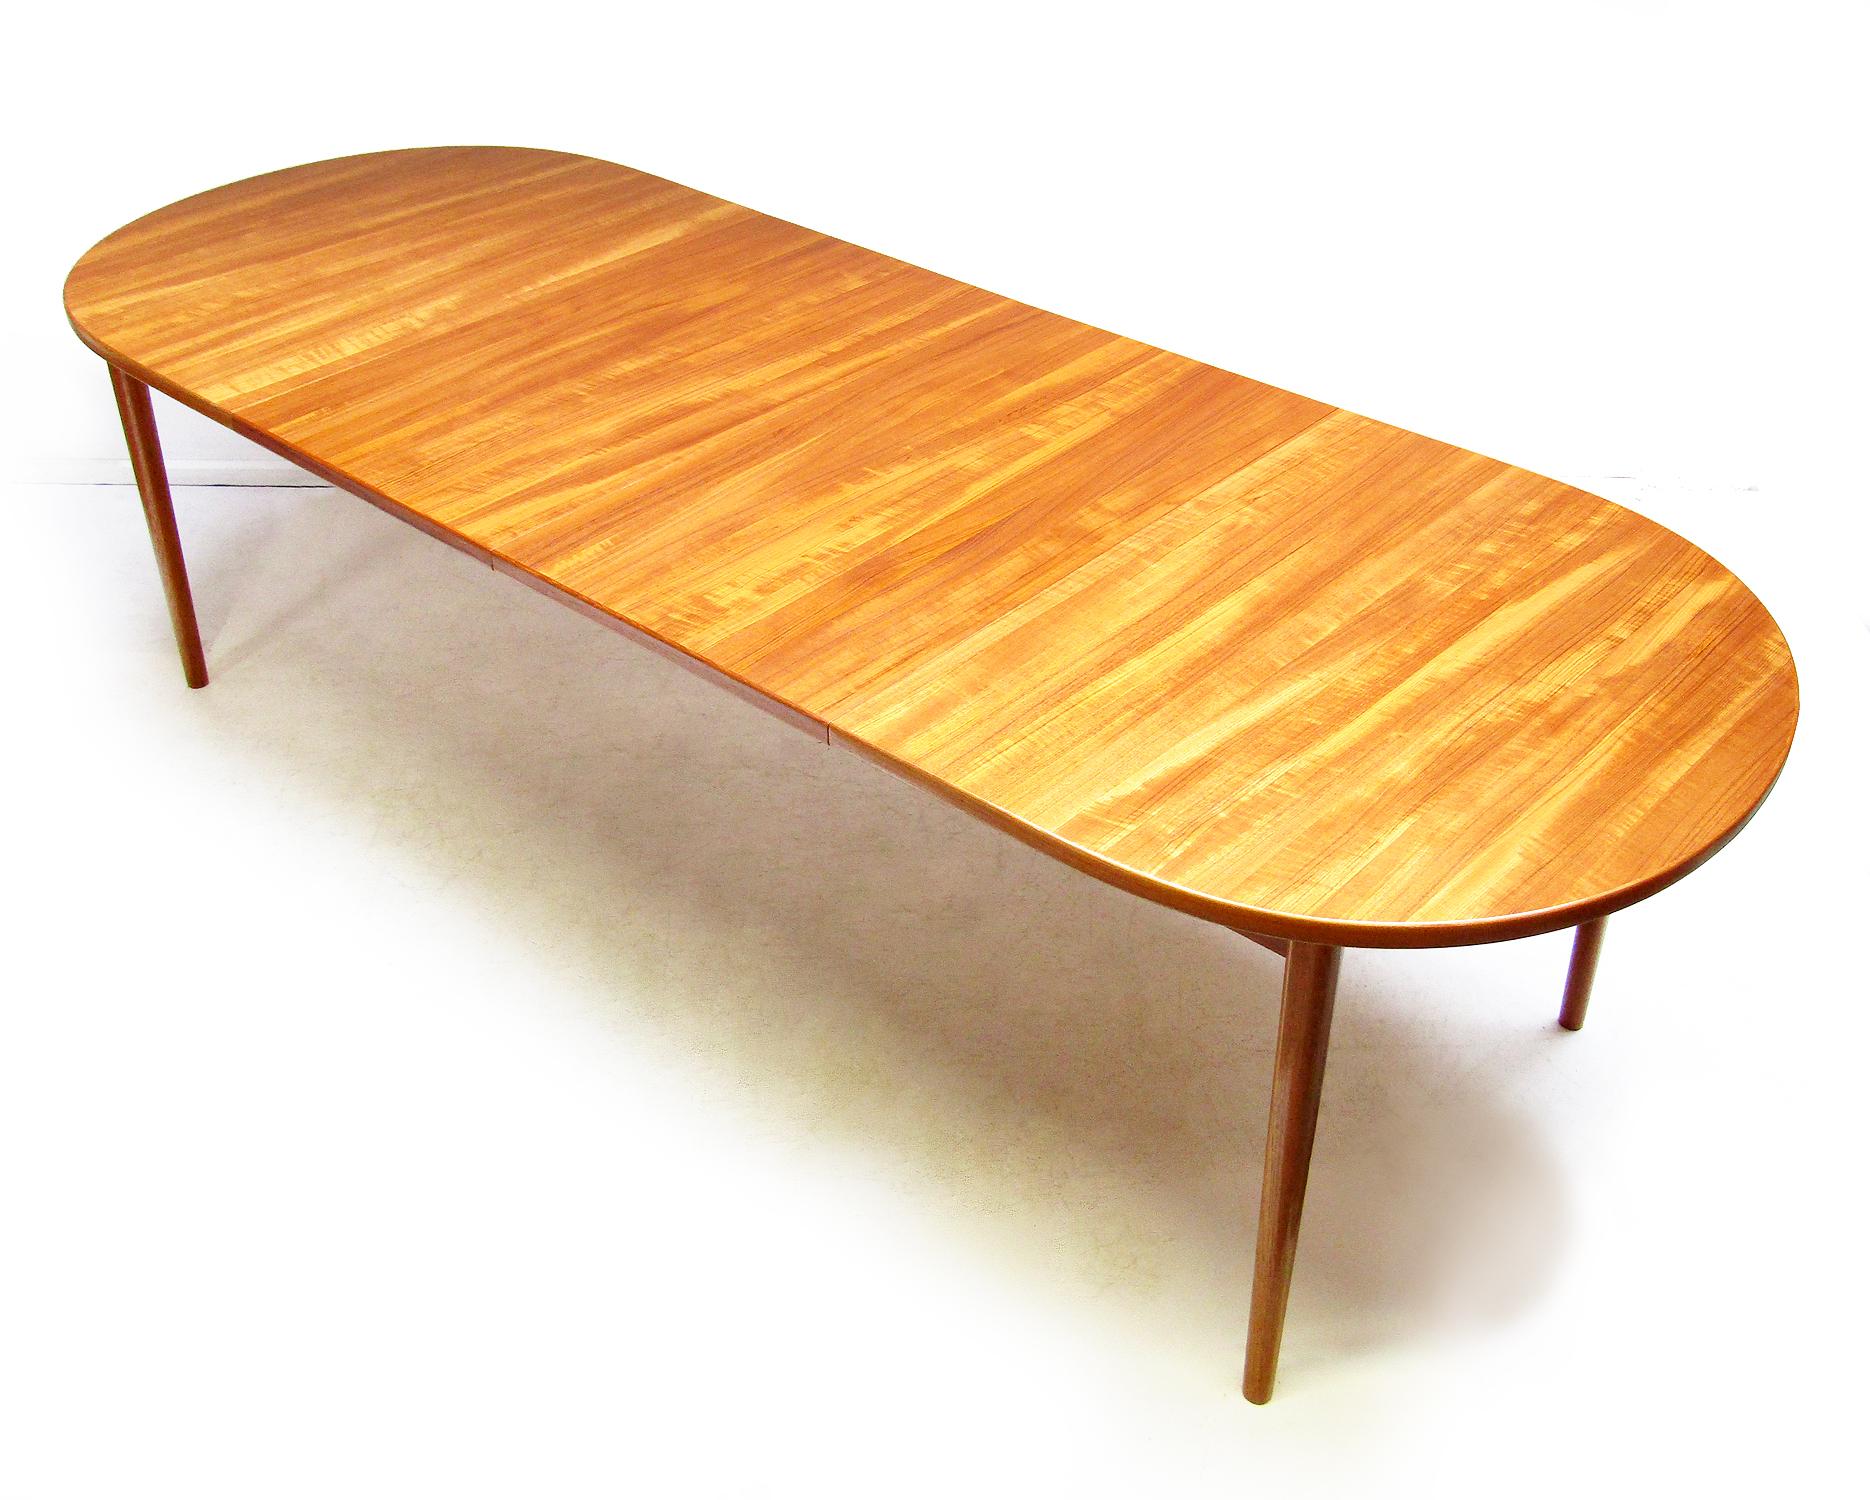 Huge Swedish Banqueting Table by Nils Jonsson for Troeds 1